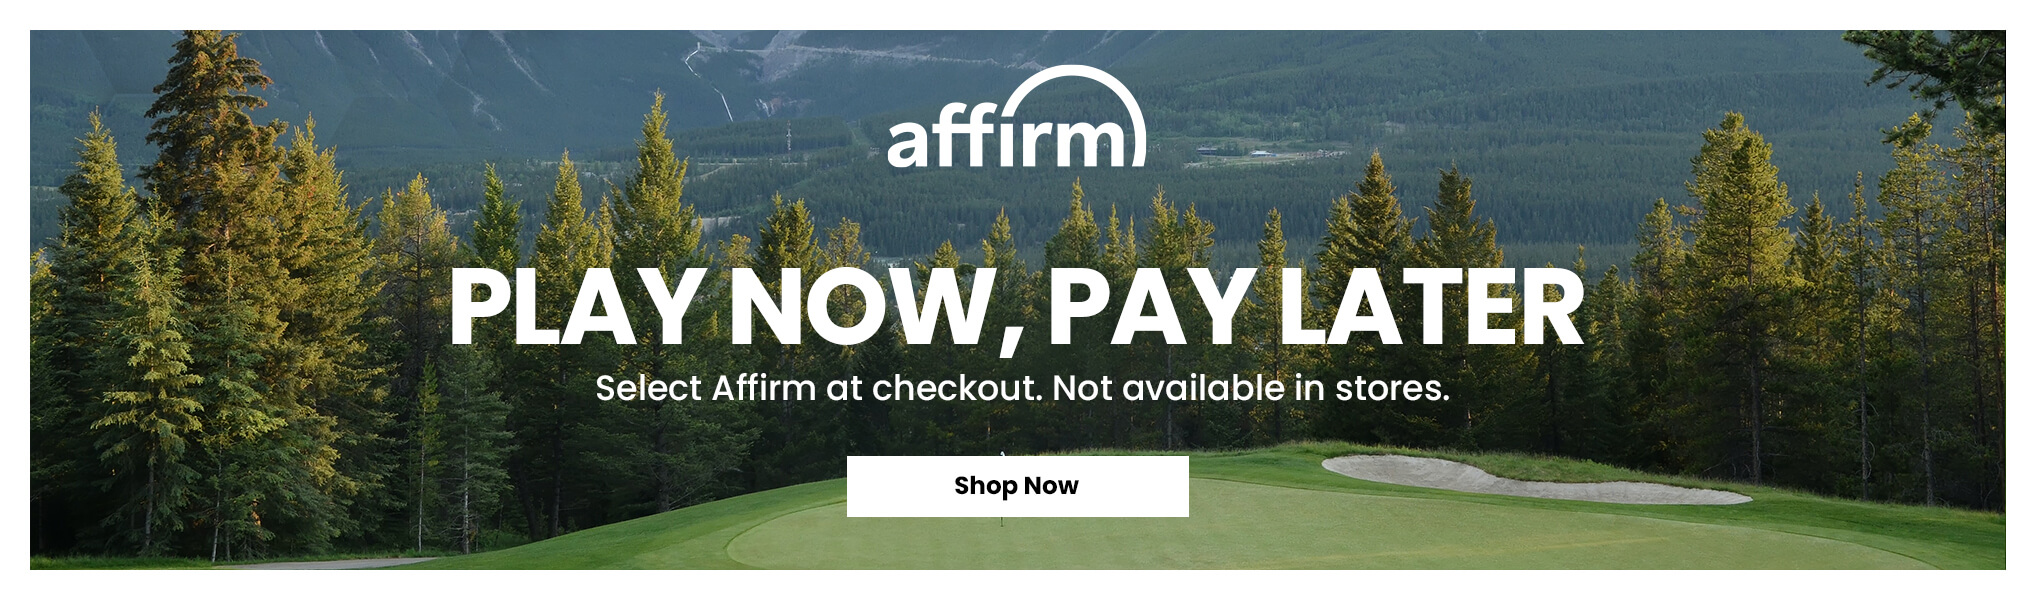 Play Now, Play Later With Affirm